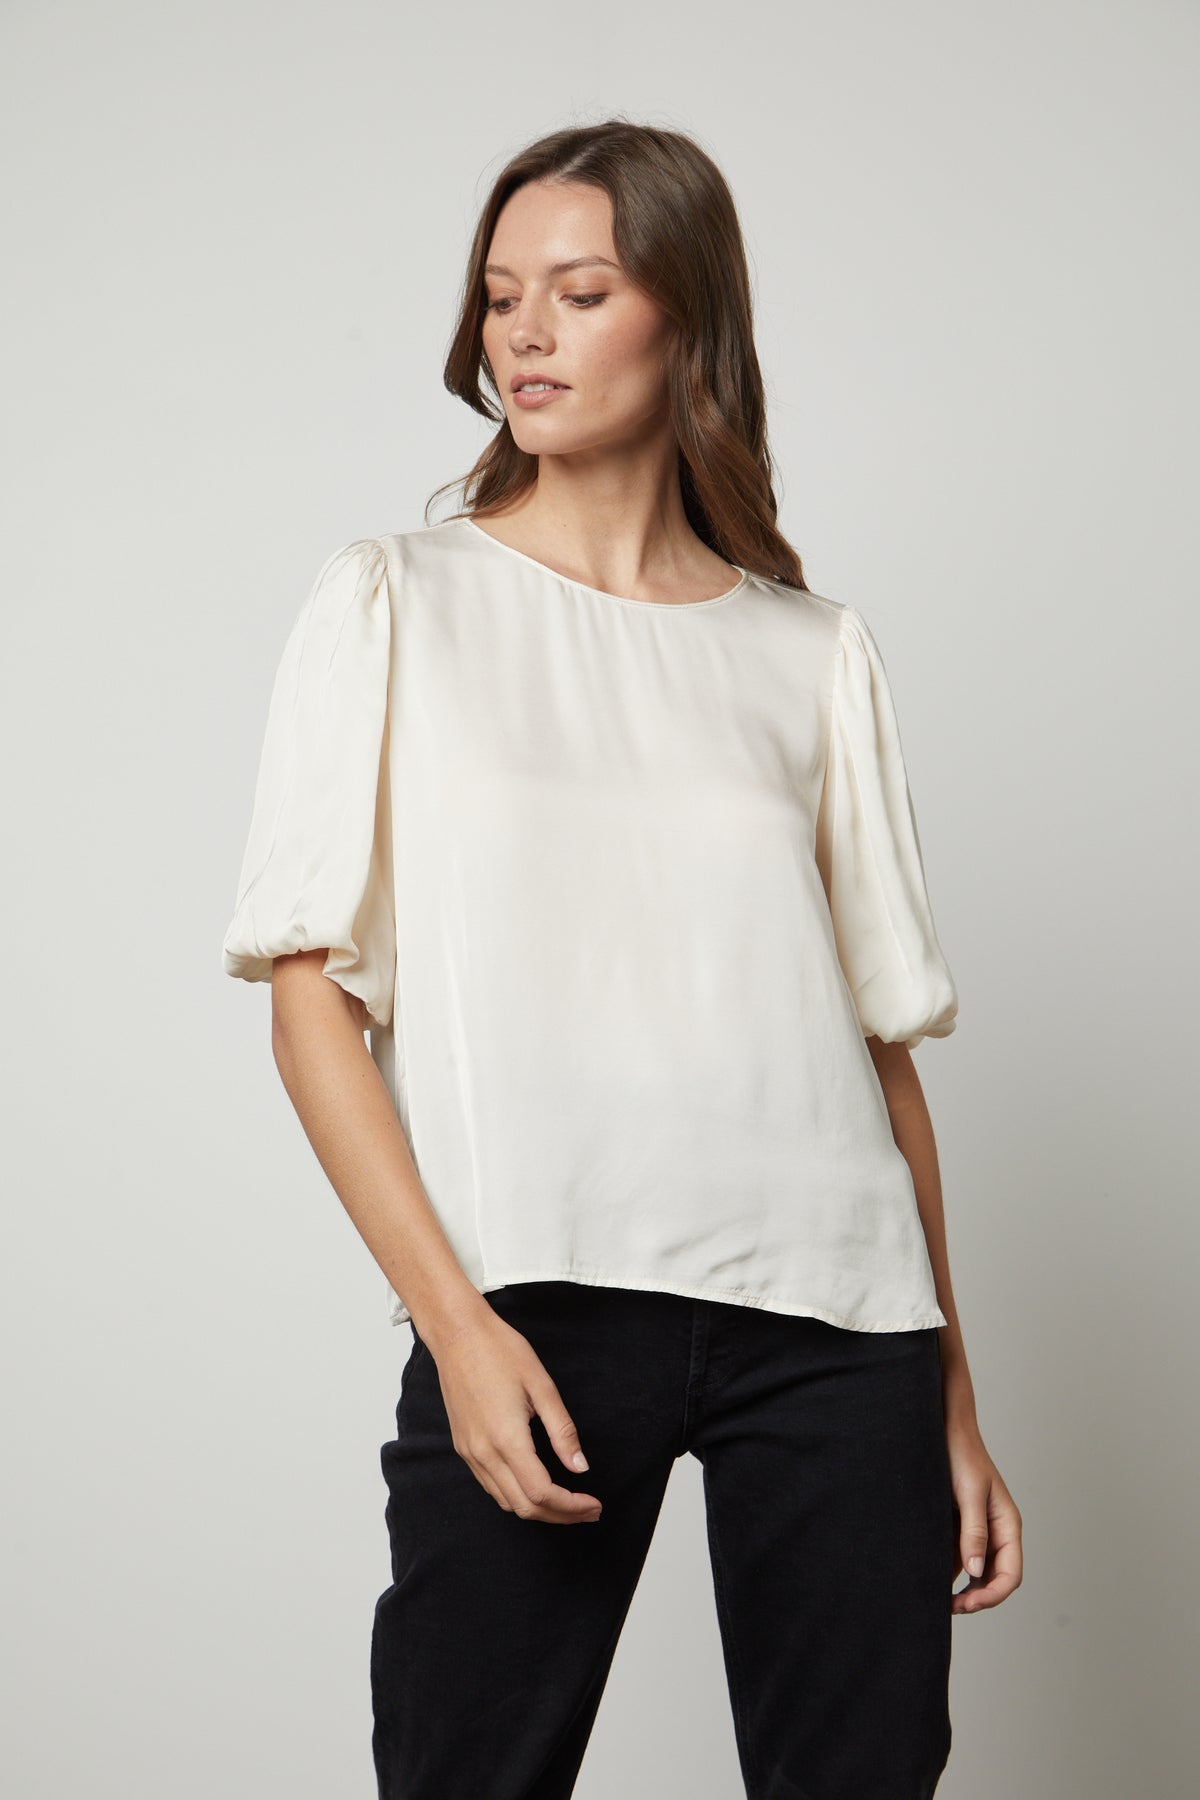 The model is wearing a Velvet by Graham & Spencer DESI SATIN PUFF SLEEVE TOP cream top.-35656169652417